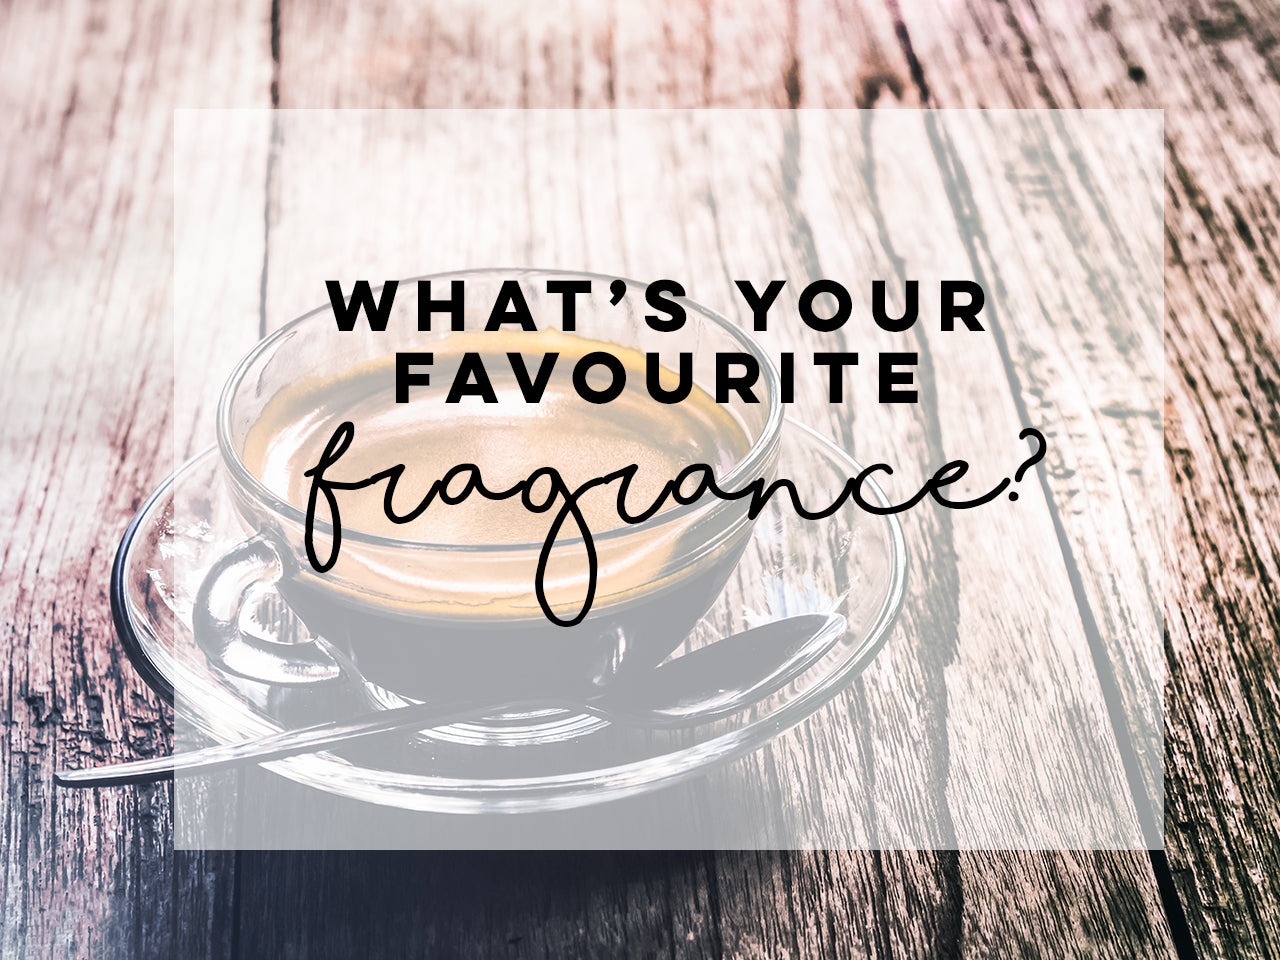 What's your favourite Fragrance